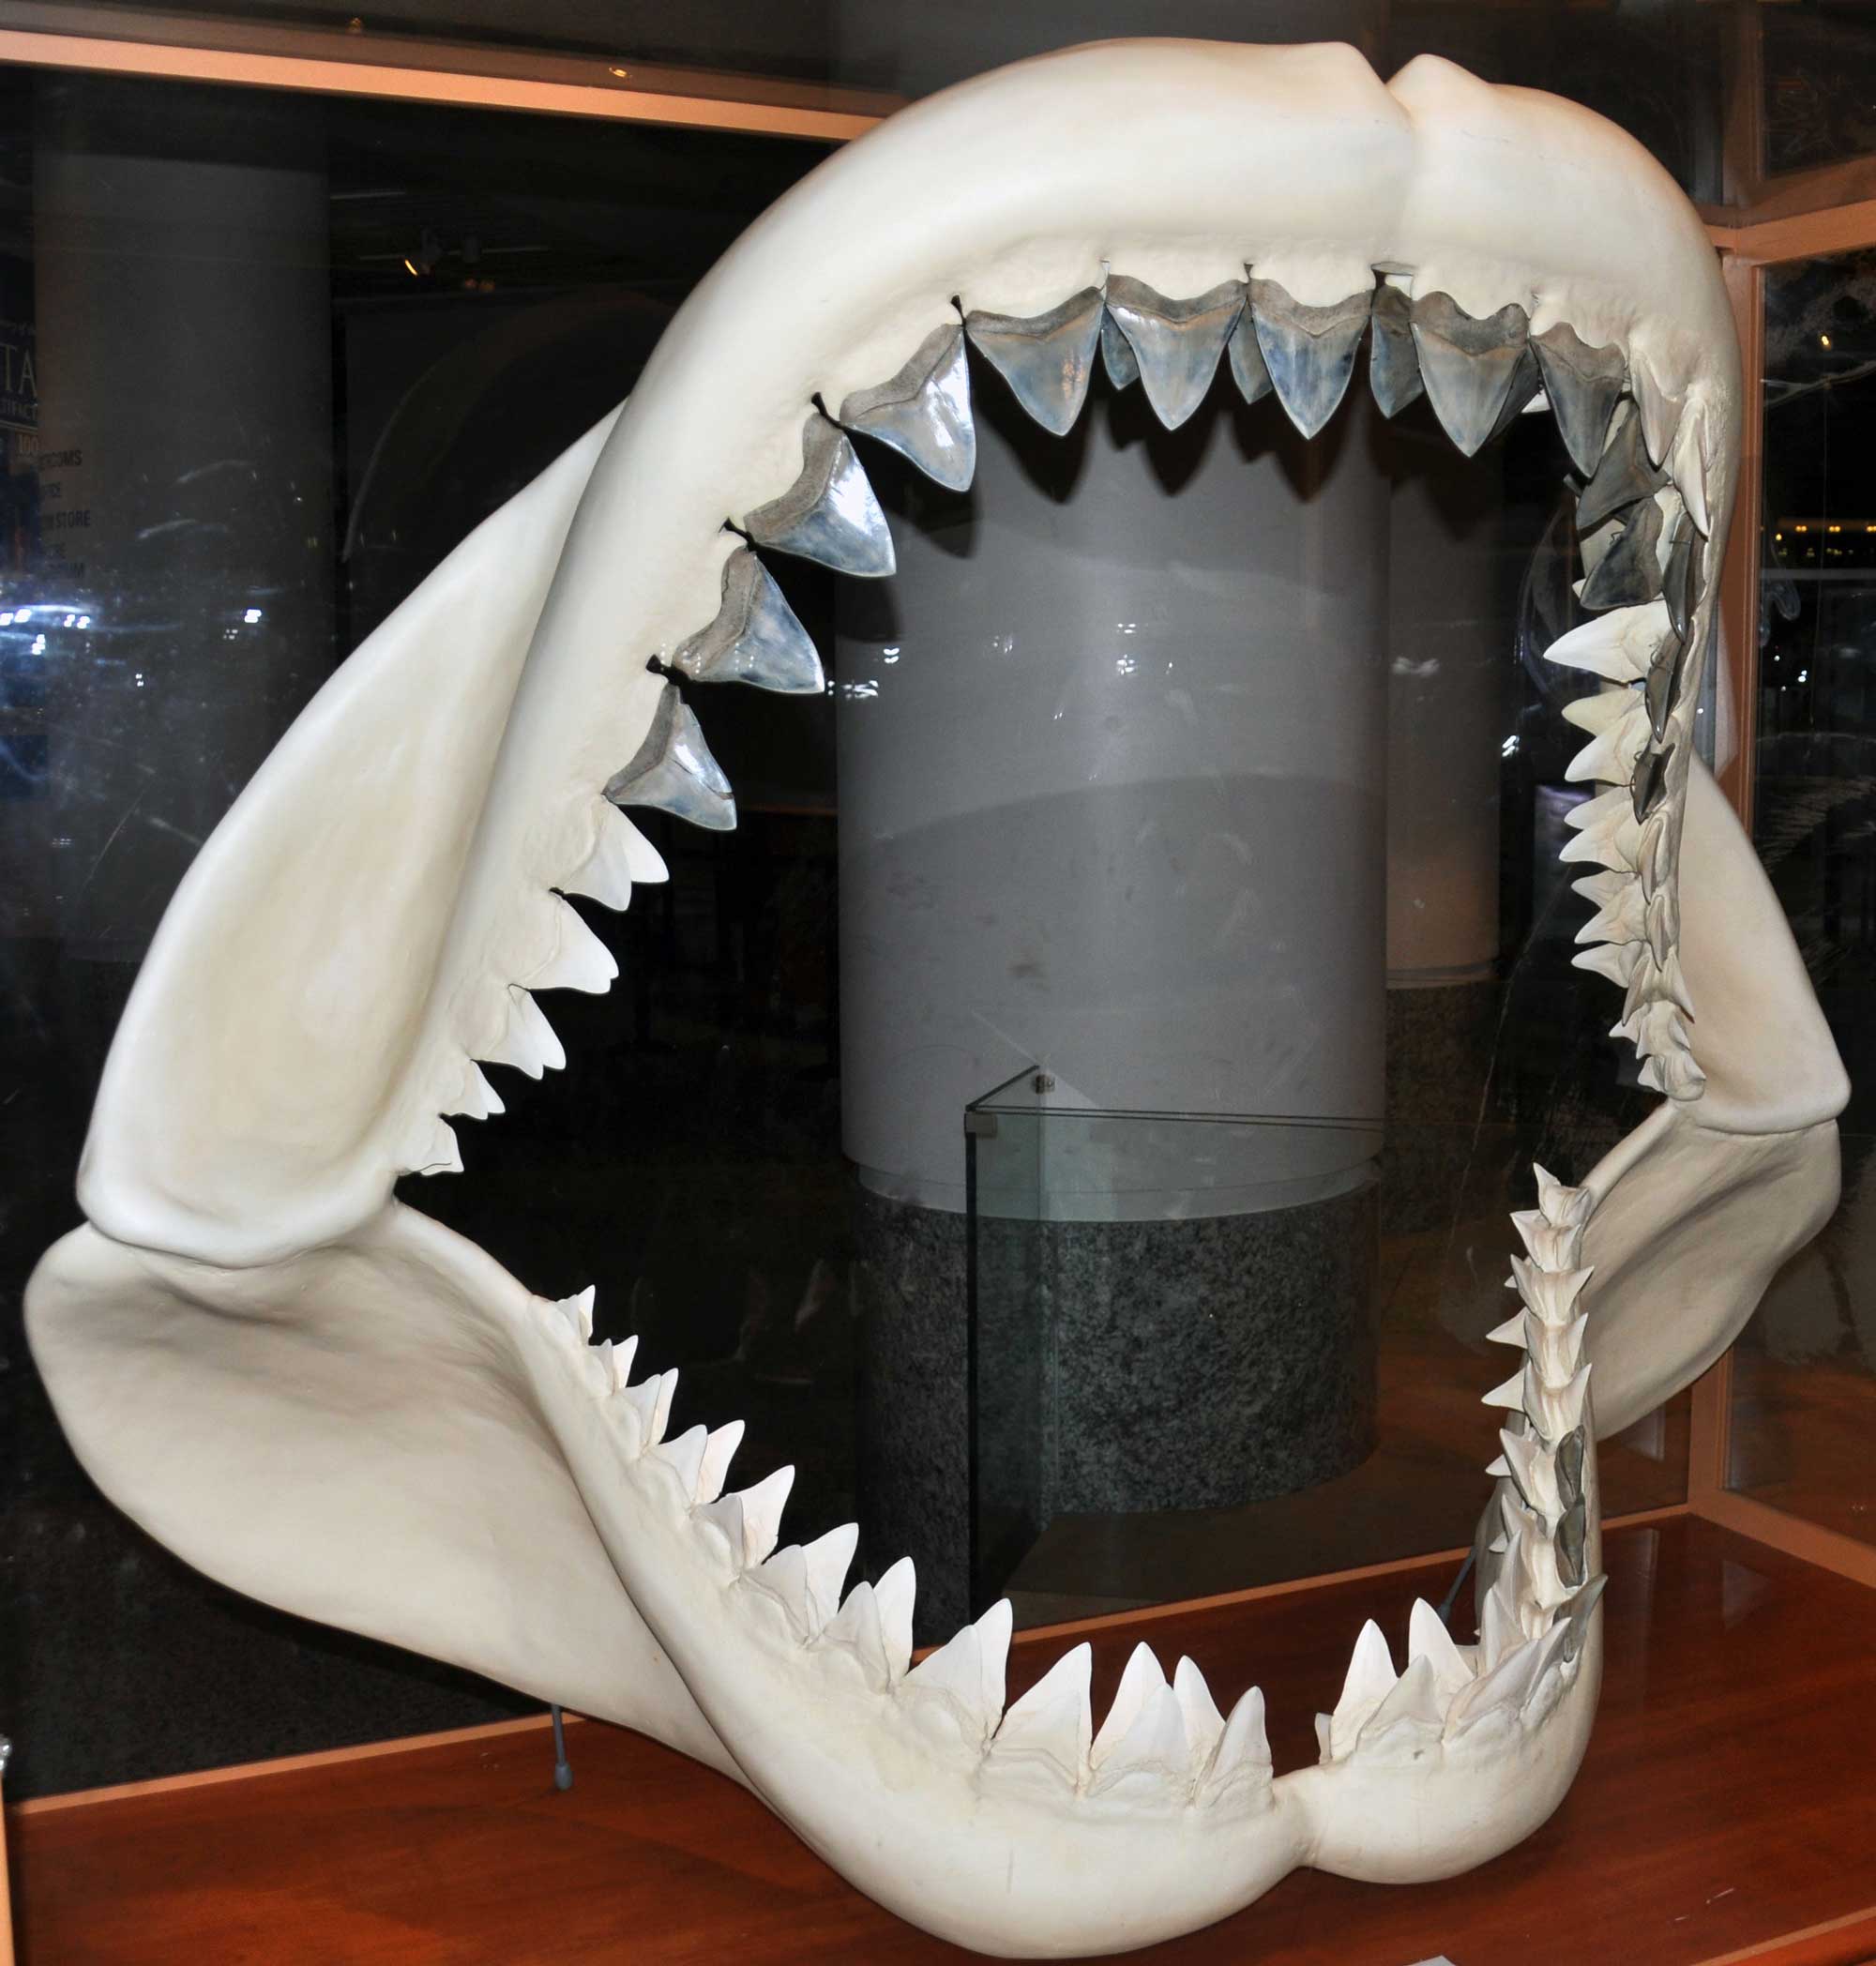 Photograph showing the giant jaws of the shark Otodus megalodon.